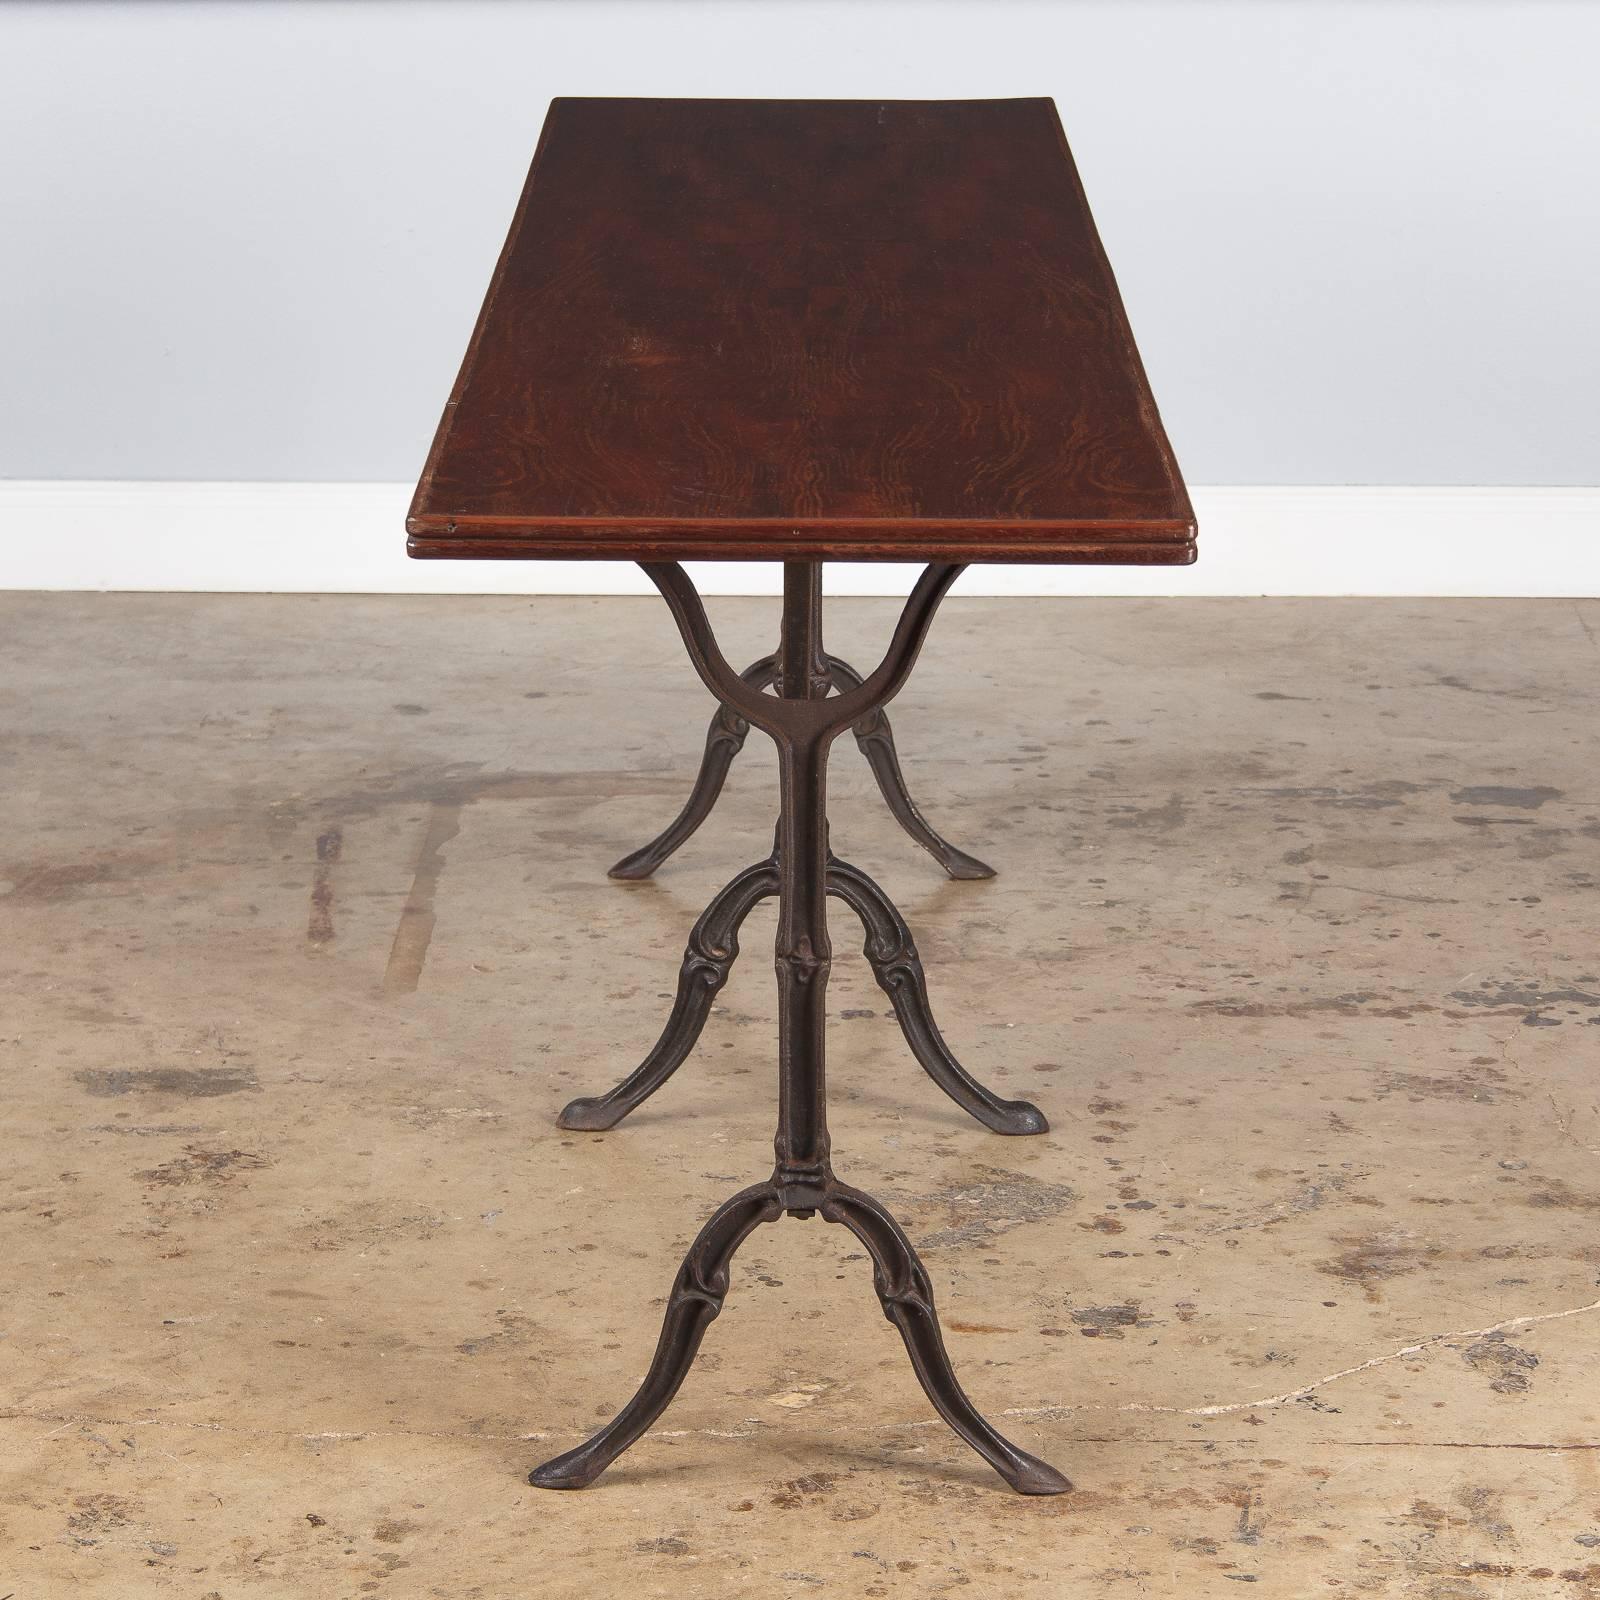 Industrial French Iron Base Bistro Table with Lacquered Wooden Top, 1920s